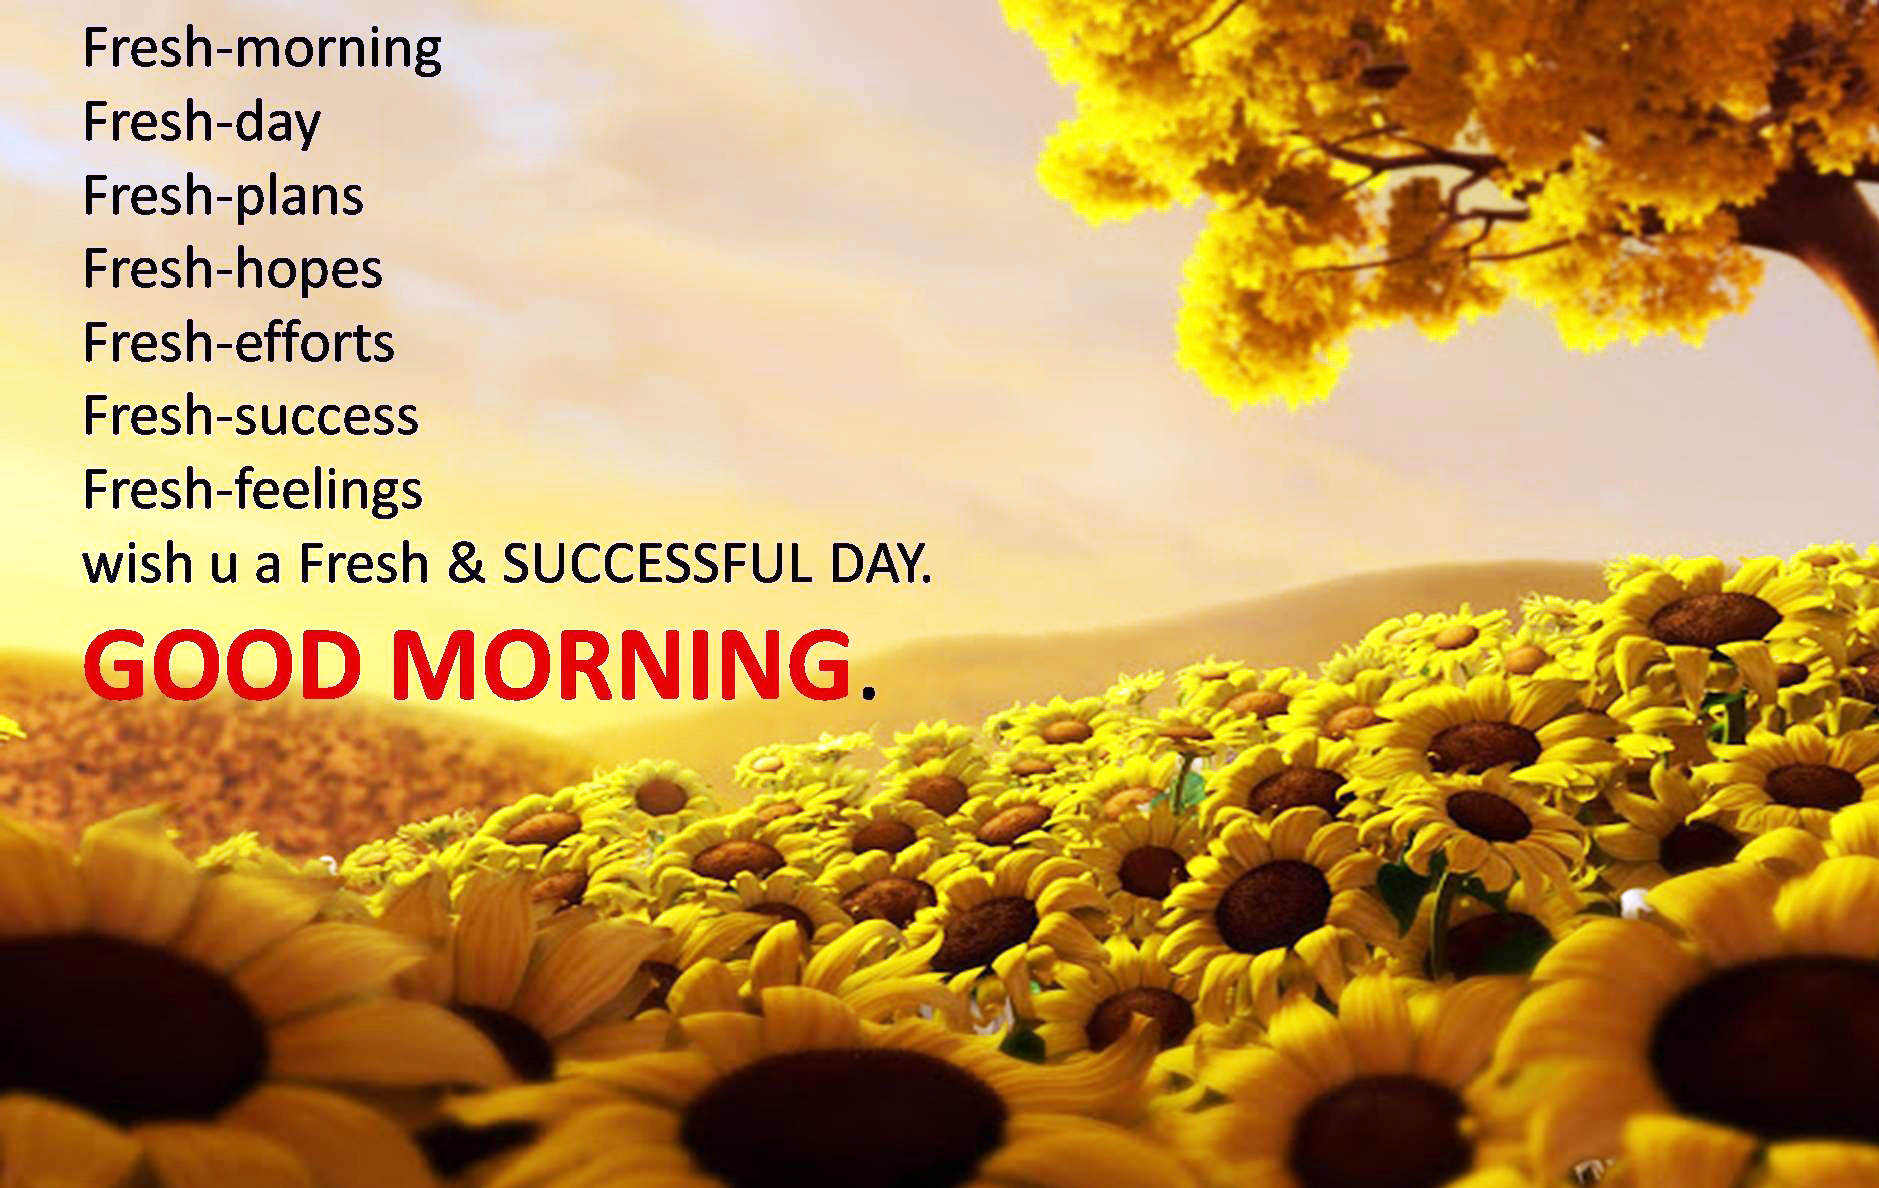 good morning images with quotes hd - Wish u a fresh and successful day